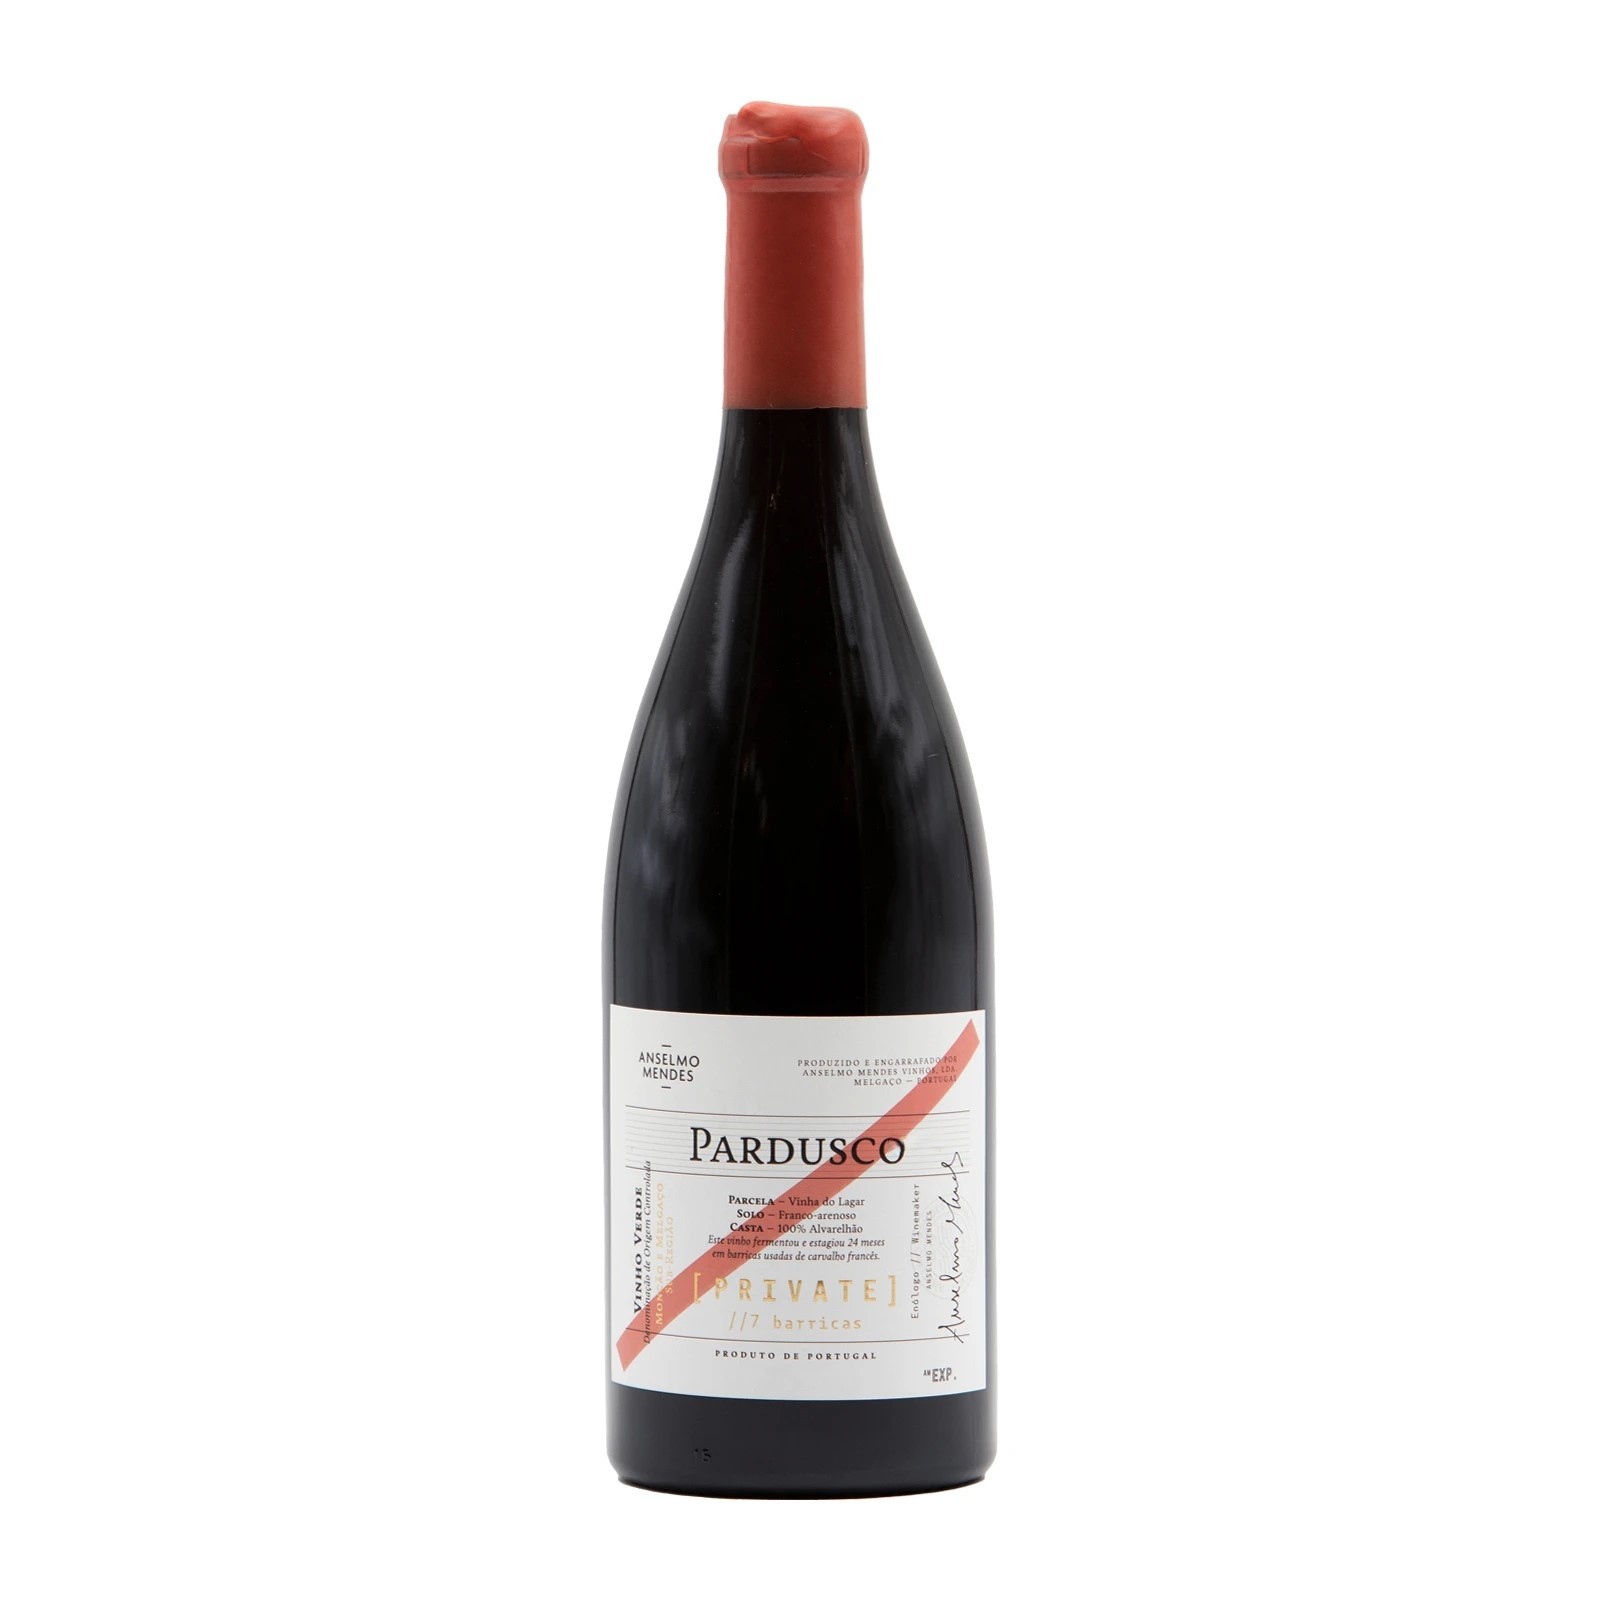 Pardusco Barricas Private Red 2018